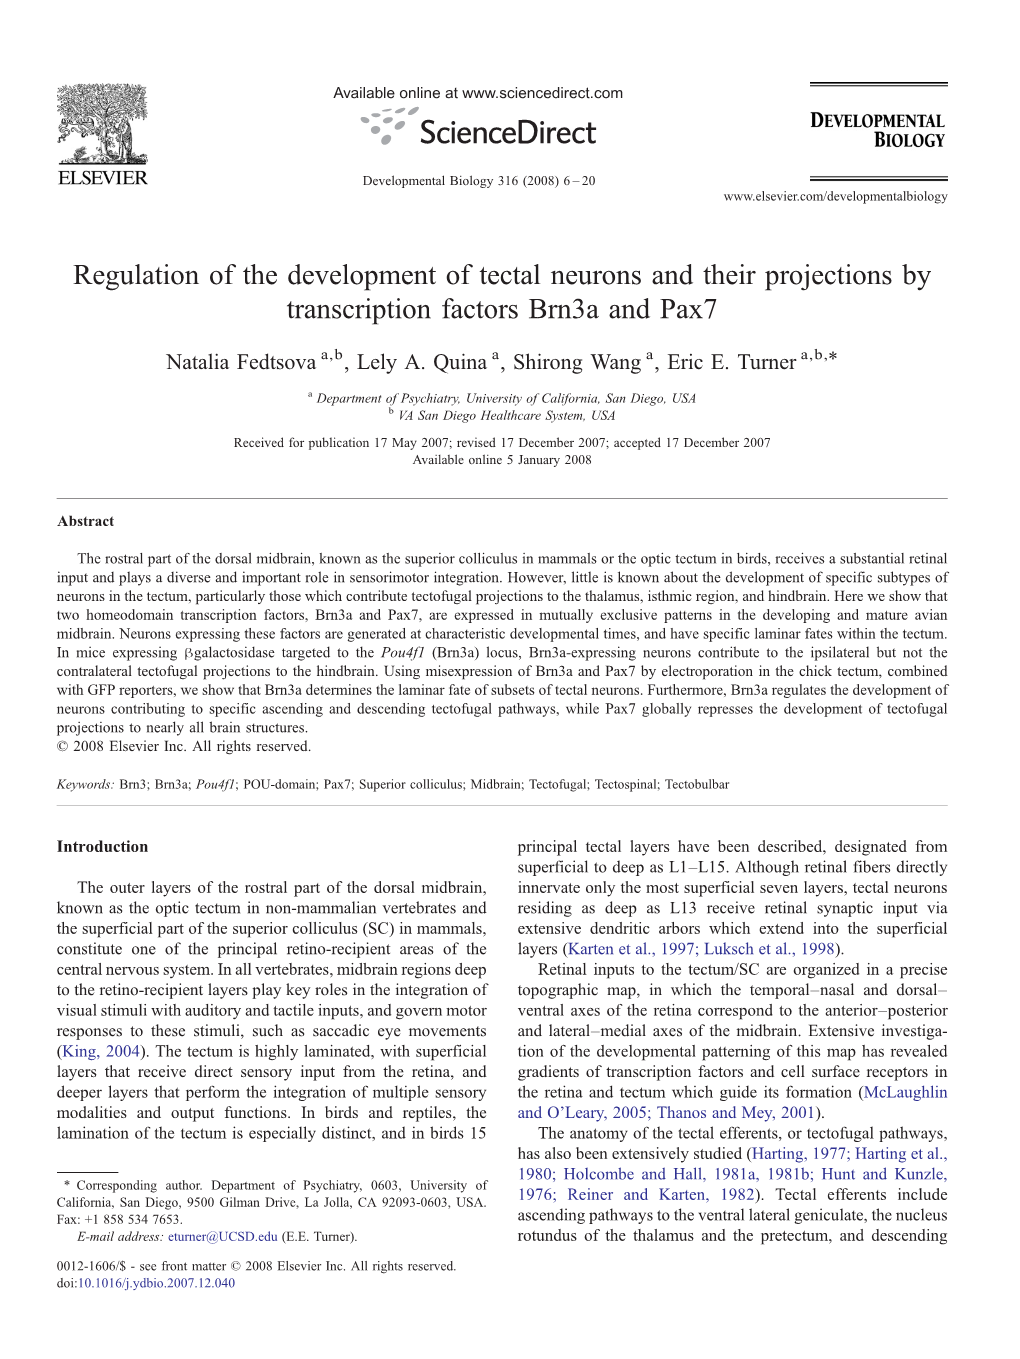 Regulation of the Development of Tectal Neurons and Their Projections by Transcription Factors Brn3a and Pax7 ⁎ Natalia Fedtsova A,B, Lely A